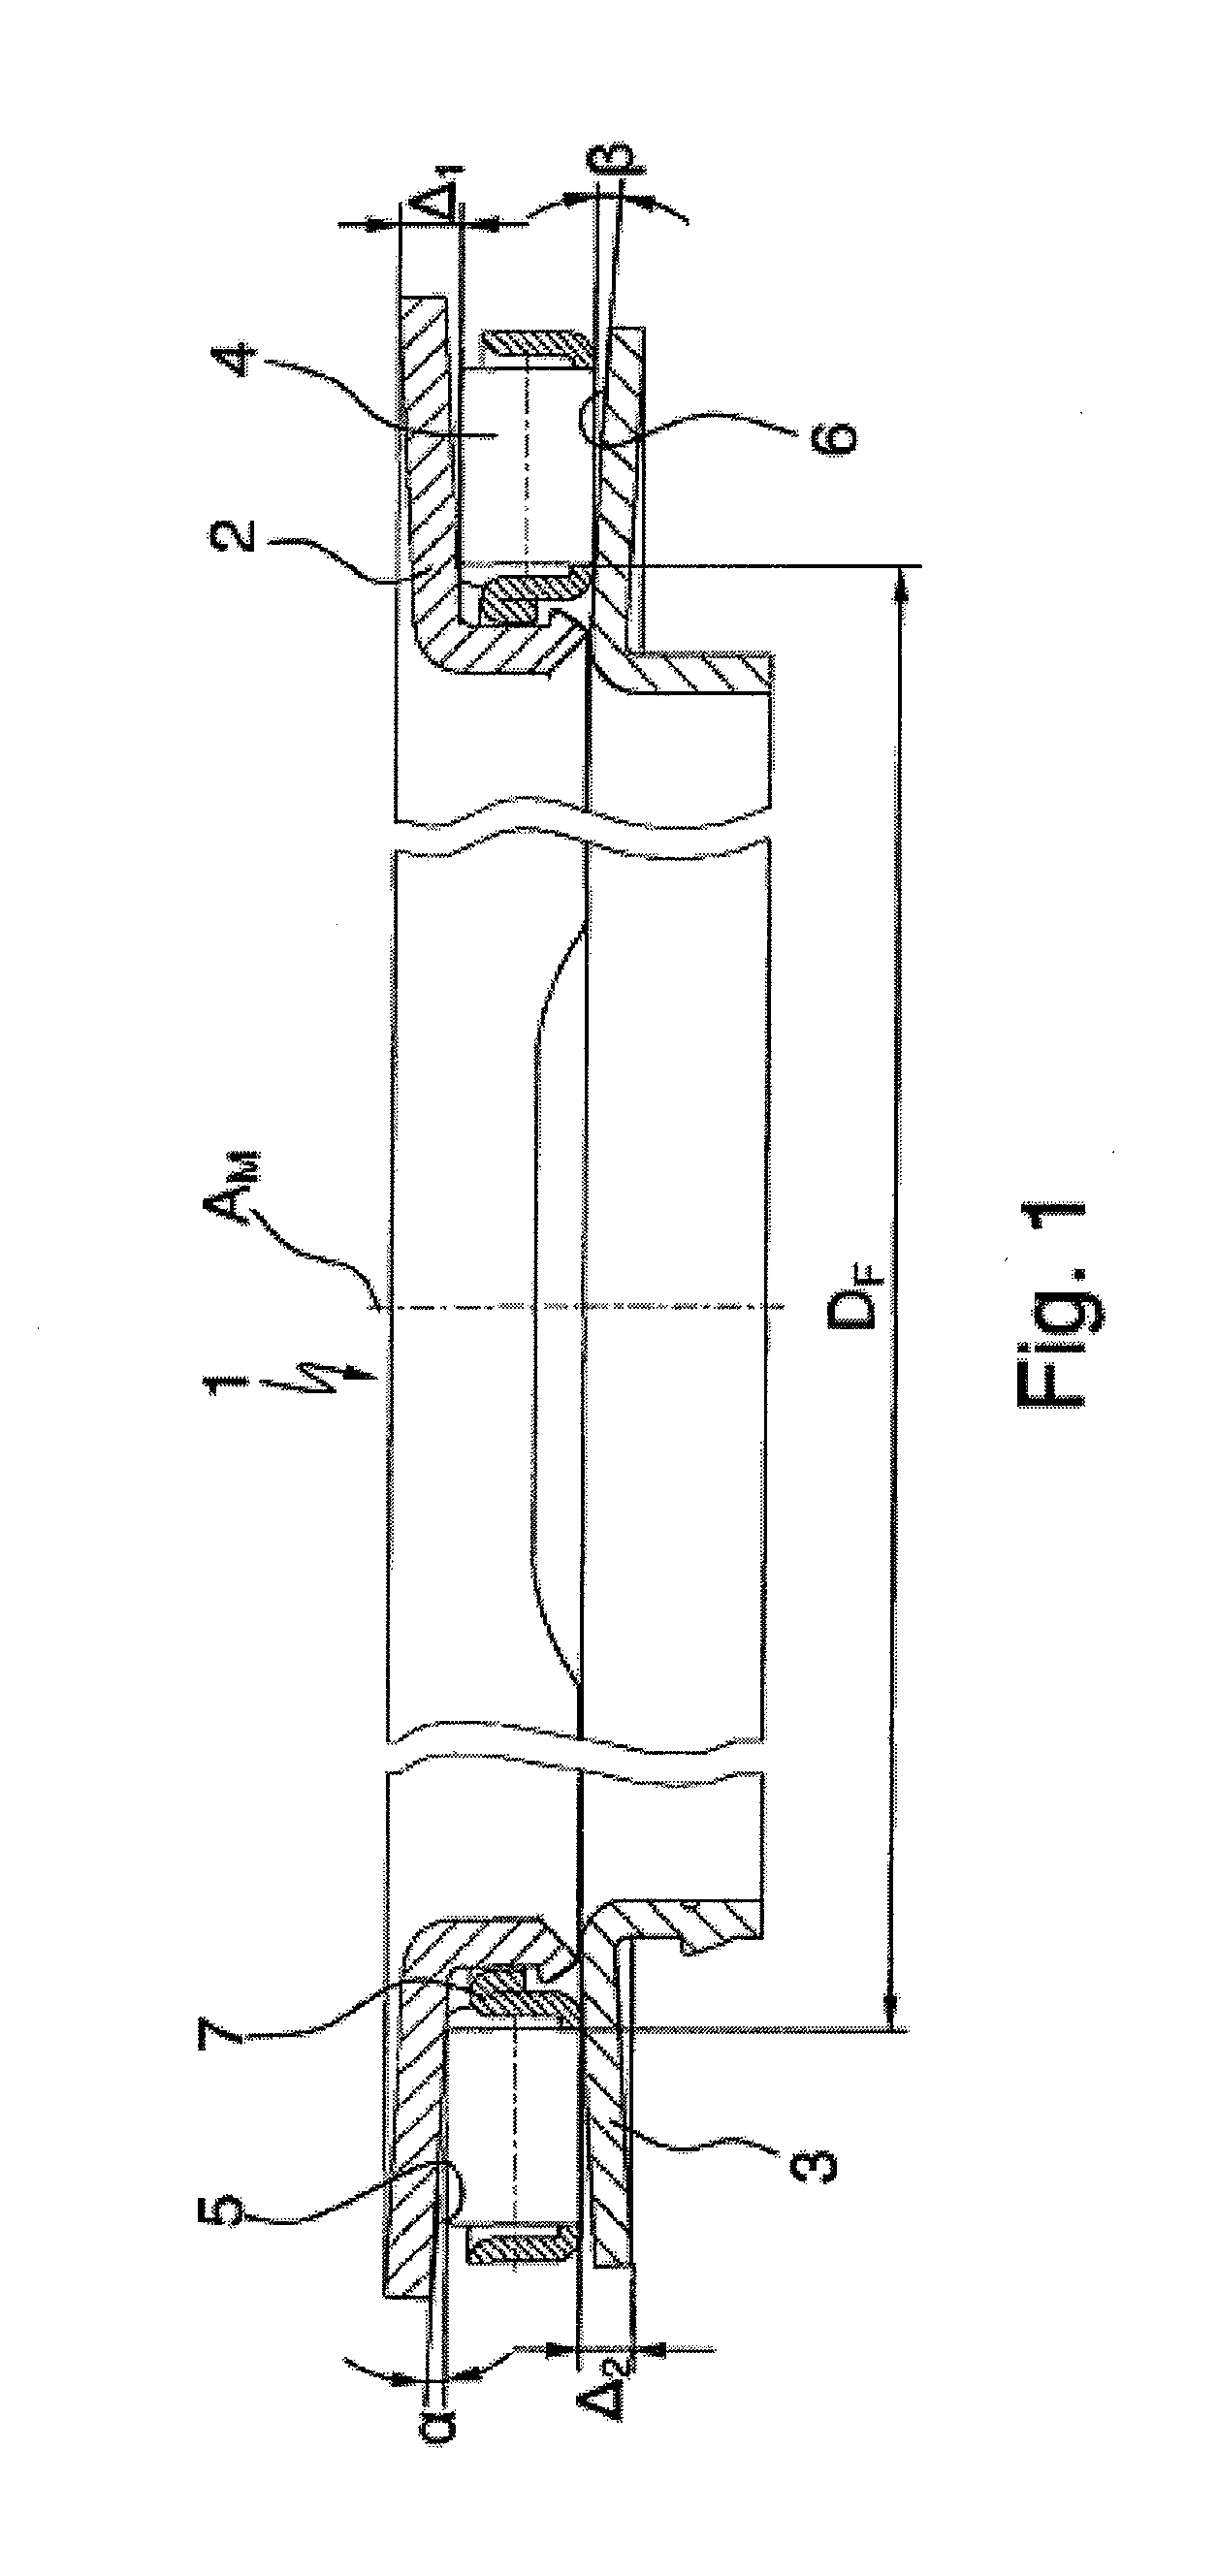 Axial Anti-friction bearing, in particular axial needle bearing